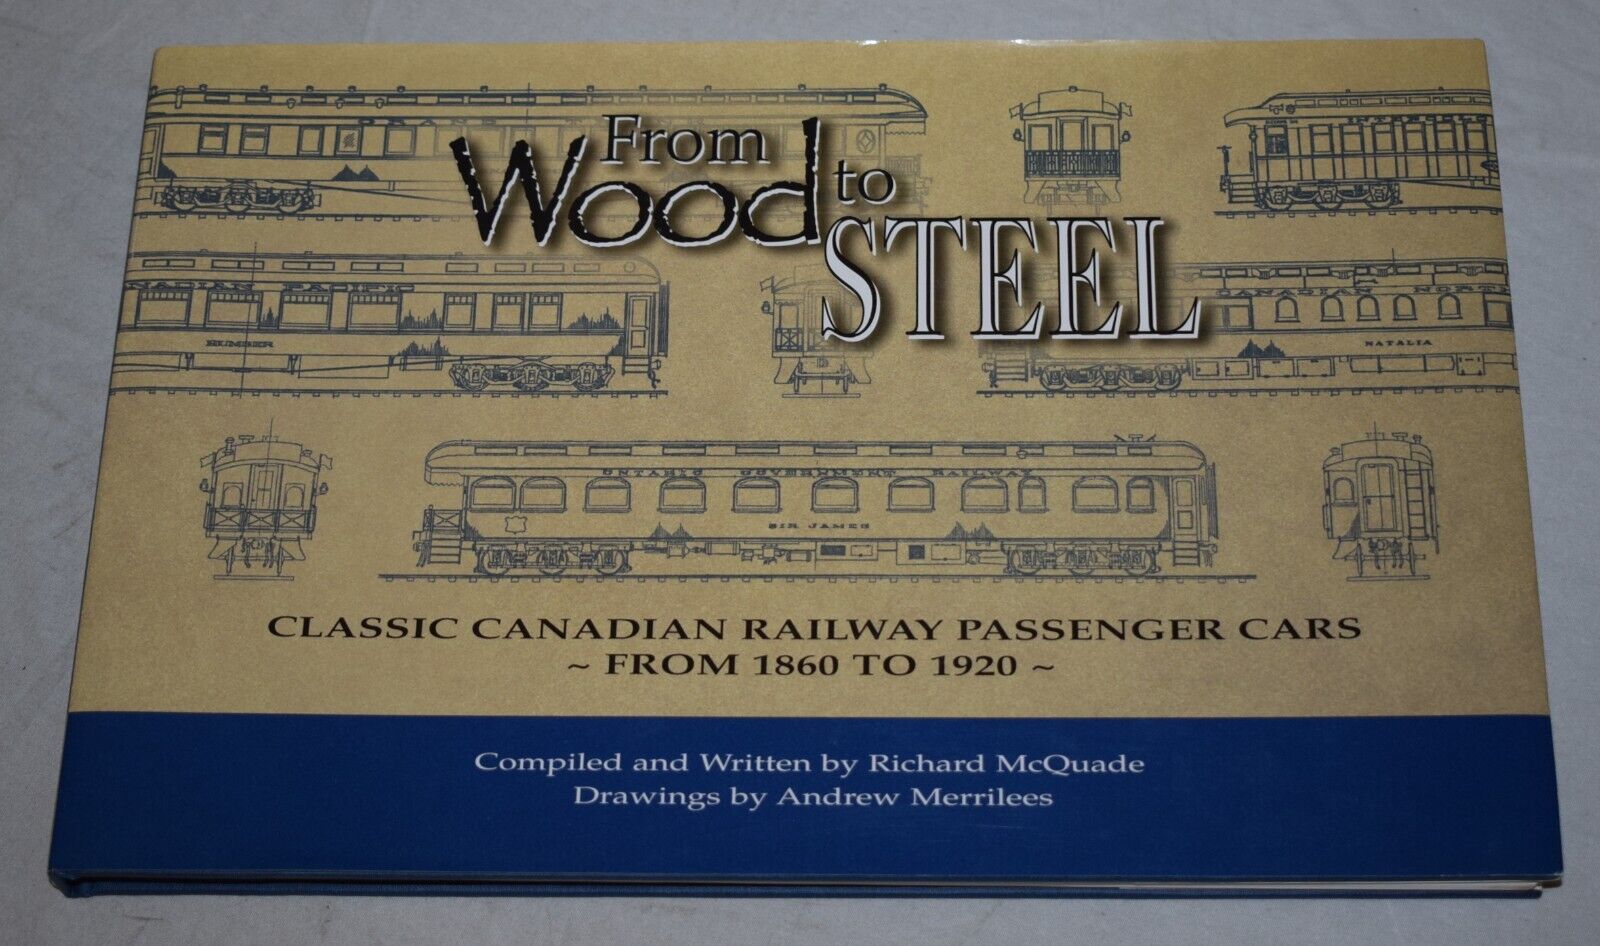 From Wood to Steel: Classic Candian Railway Passenger Cars from 1860-1920